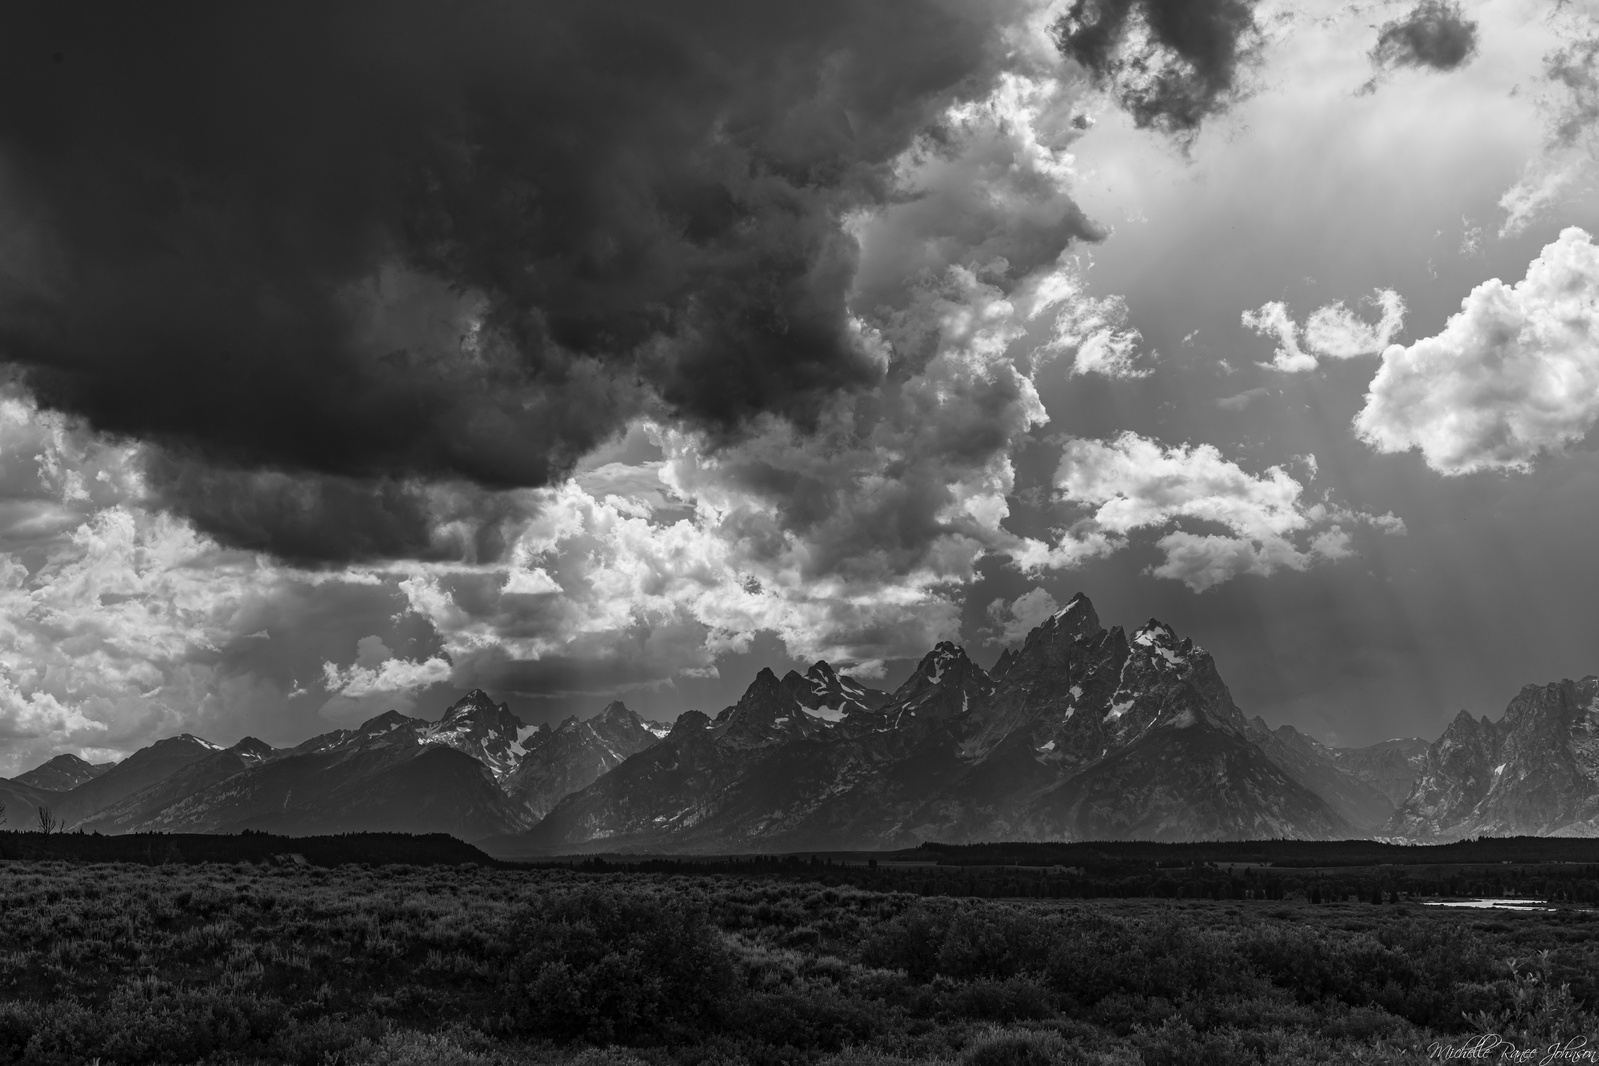 Black and White fine art photo of a thunderstorm over Grand Teton National Park, Wyoming.